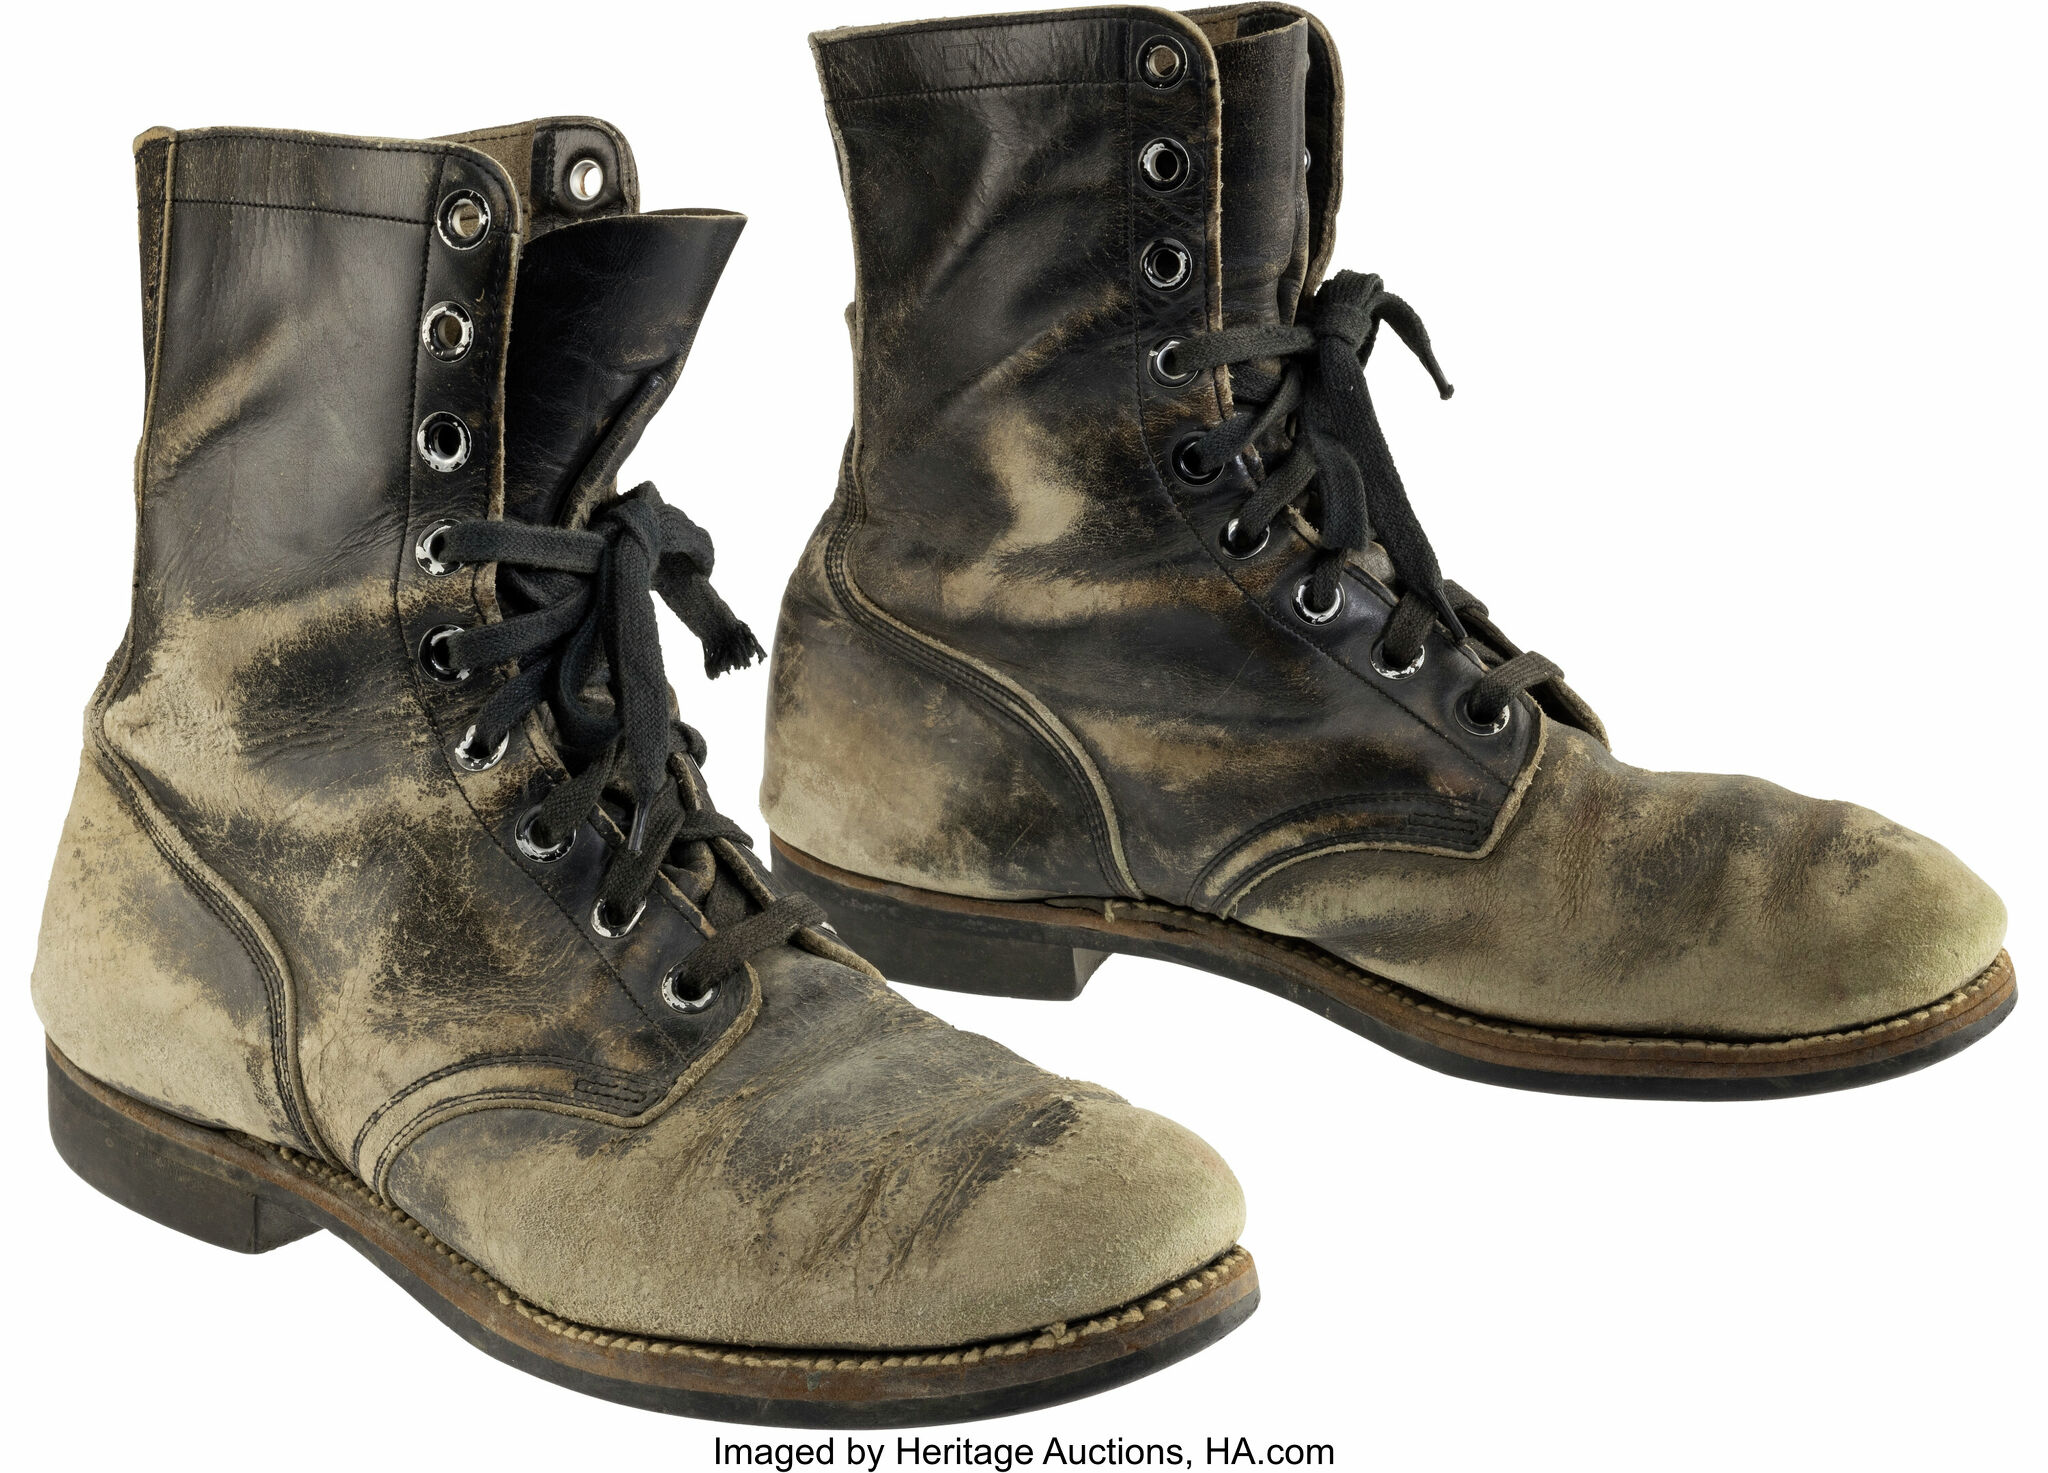 Porto stille Afslag Alan Alda's boots, dog tags from 'M*A*S*H' up for auction